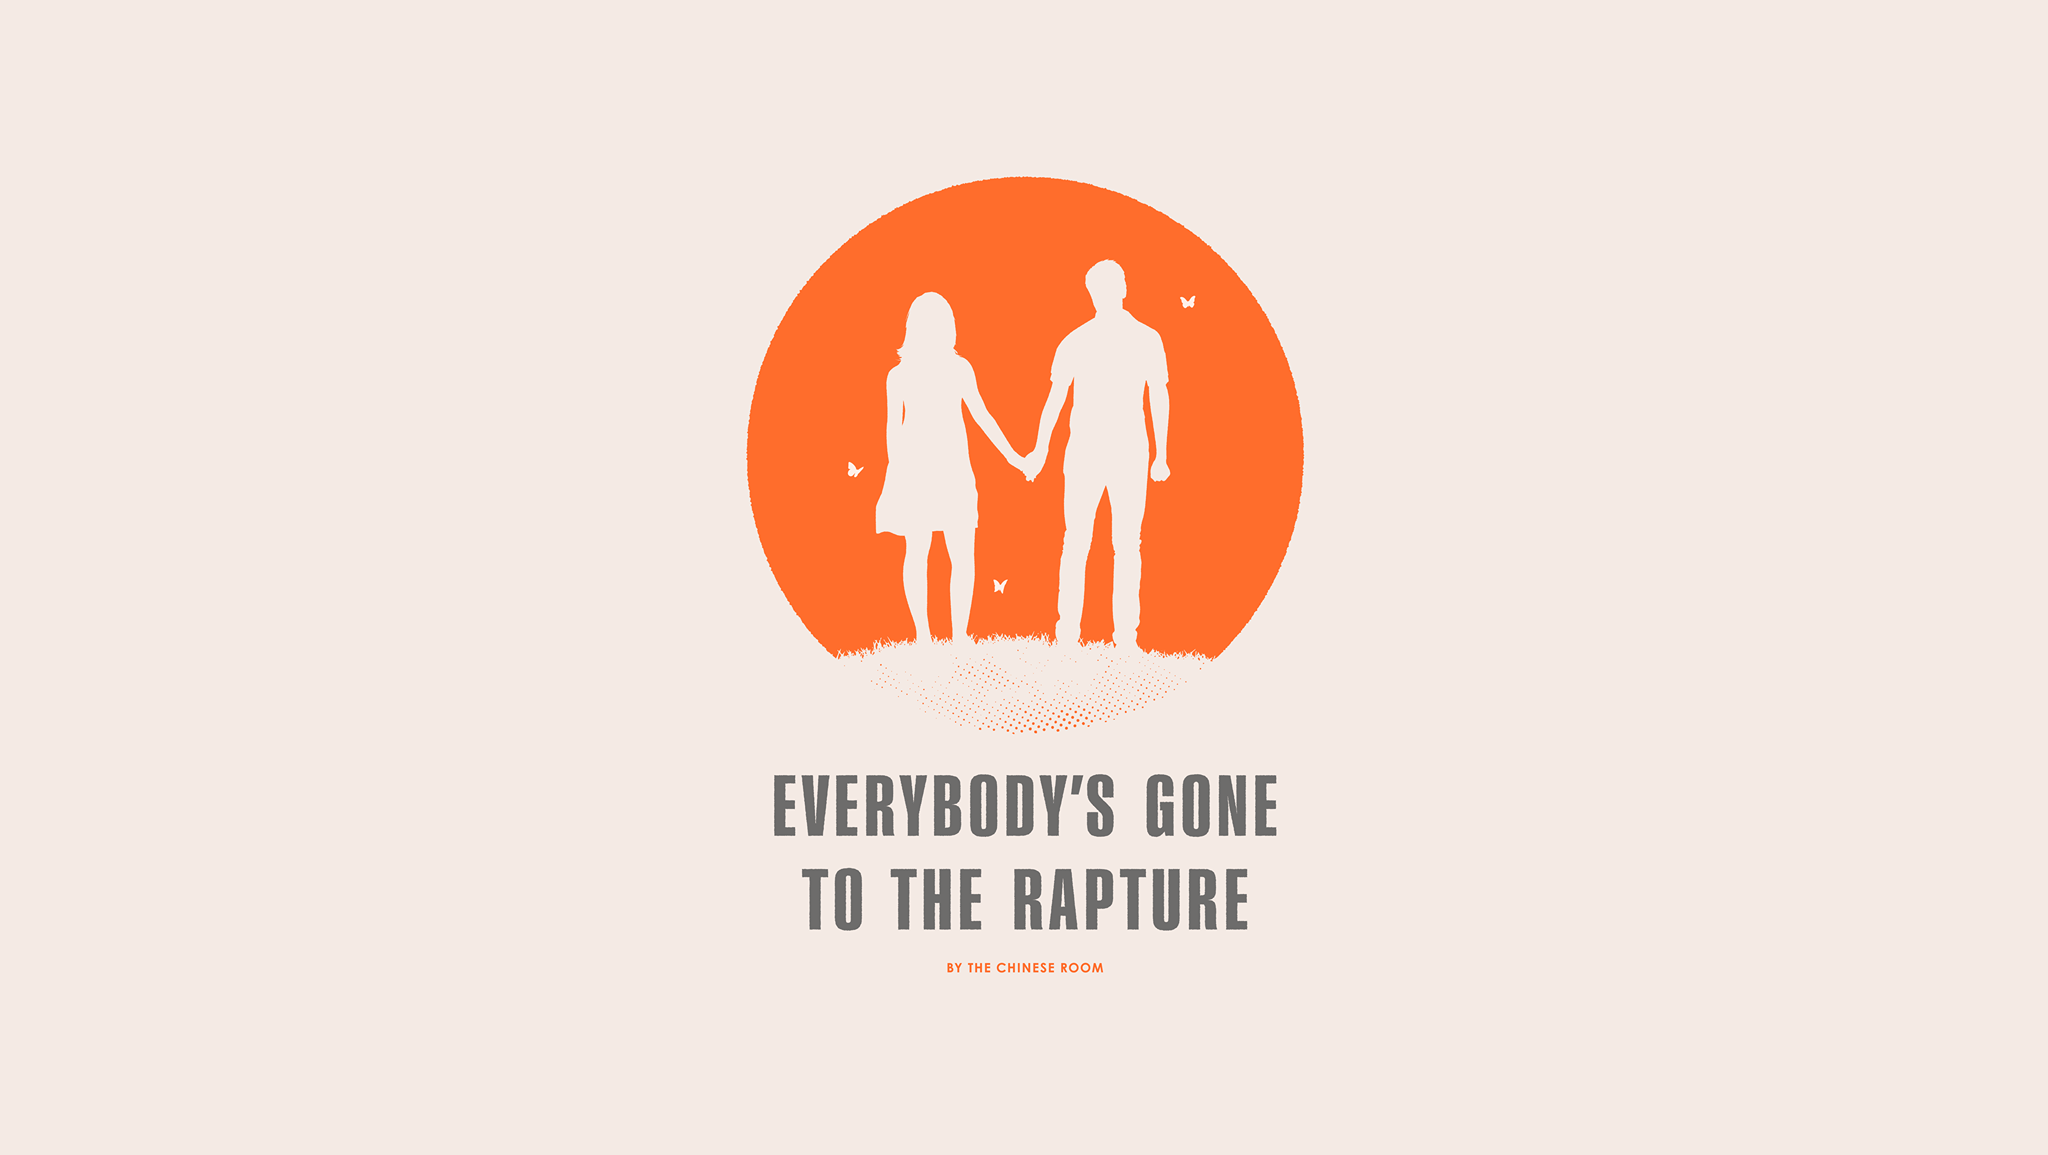 IM1373: Everybody's gone to the Rapture